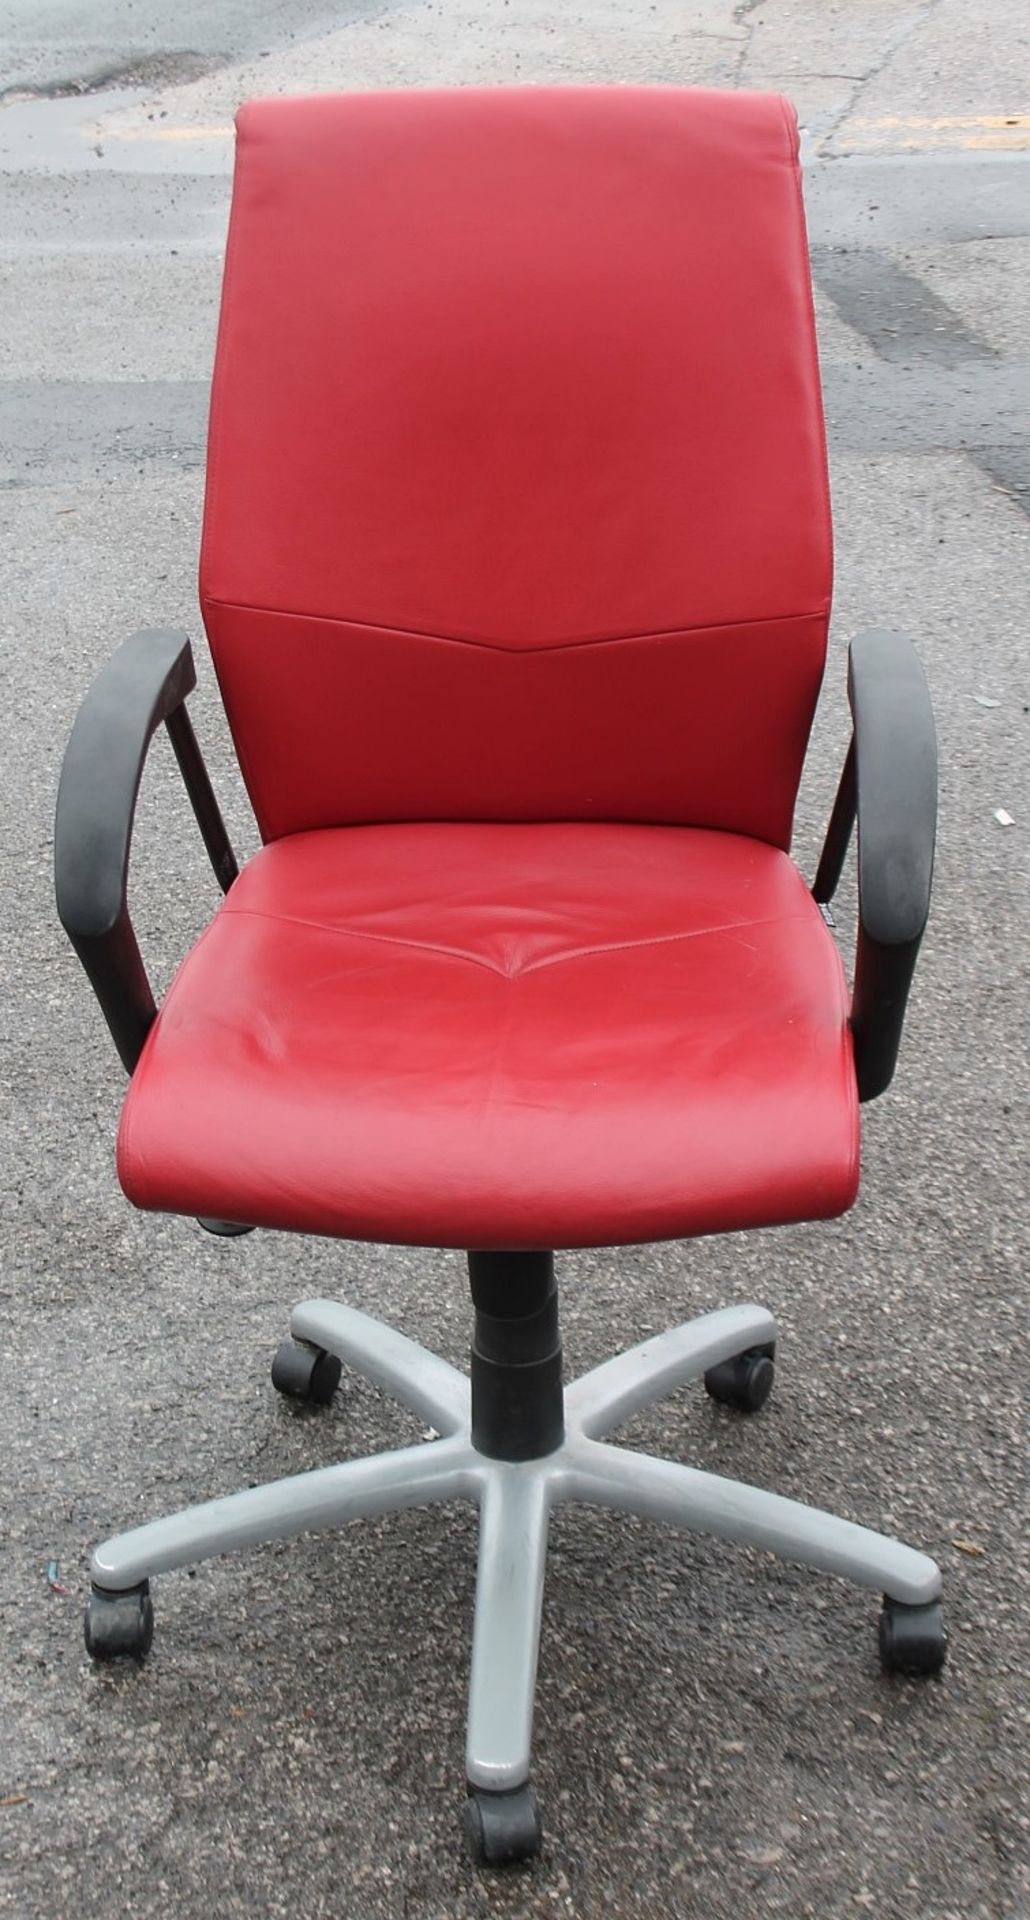 1 x VERCO Branded Gas Lift Swivel Chair Upholstered In A Red Faux Leather - Removed From An - Image 4 of 5